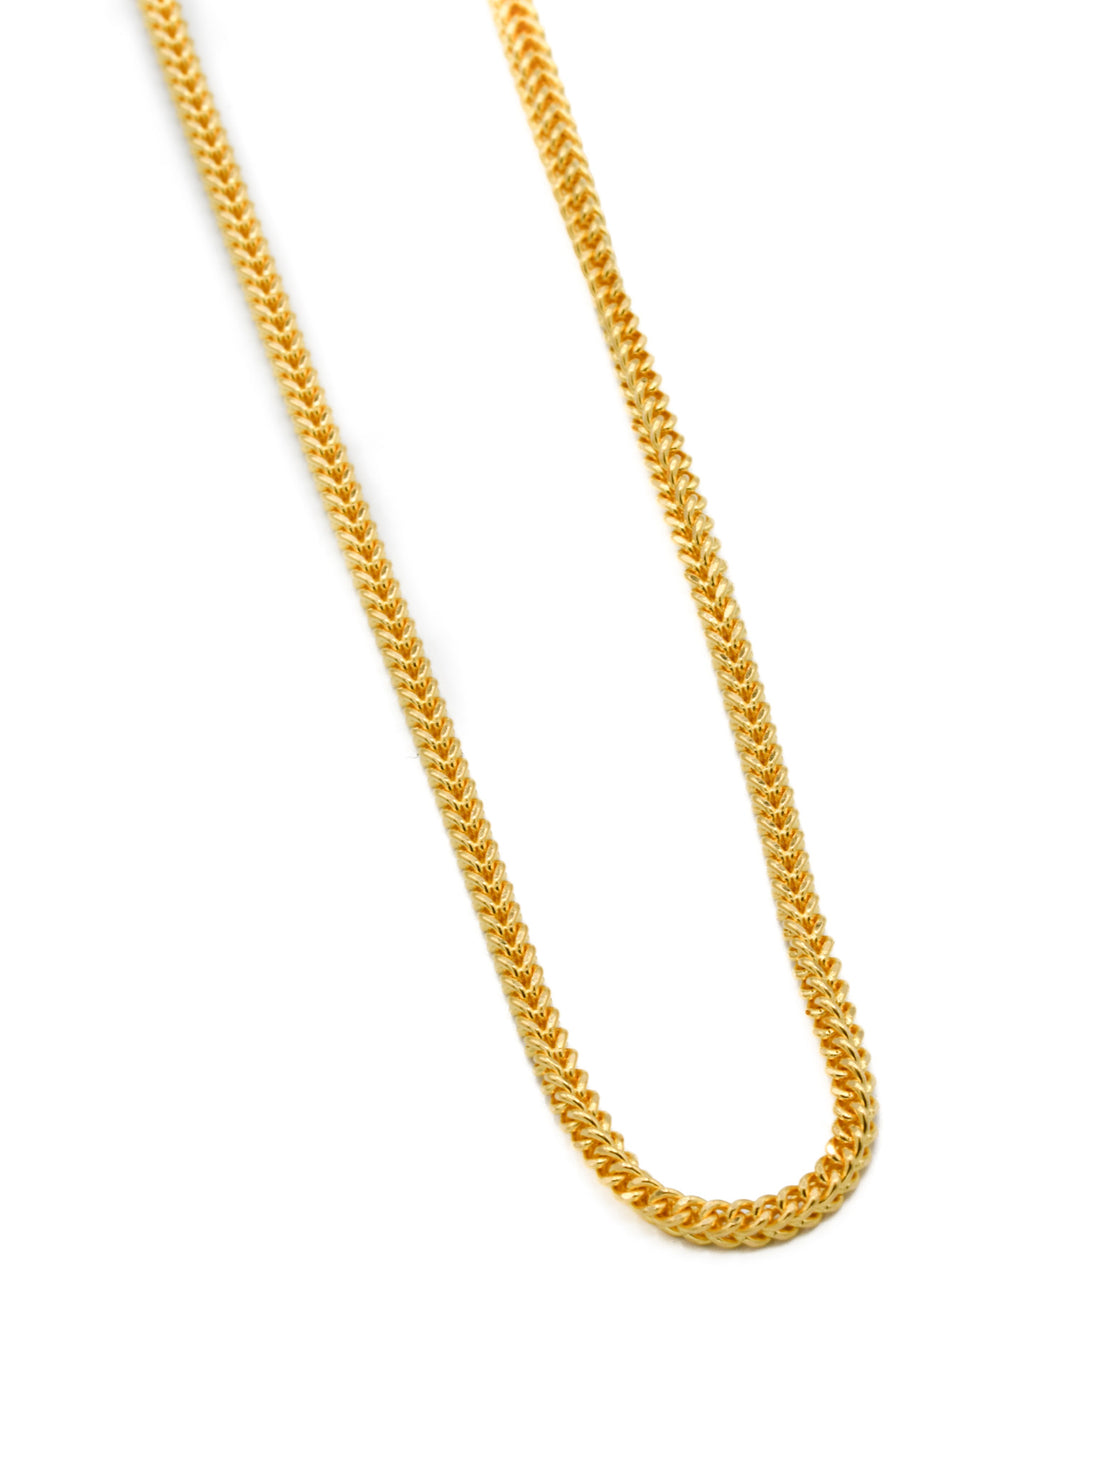 22ct Gold Hollow Fox Tail Chain - 45 cm - Roop Darshan